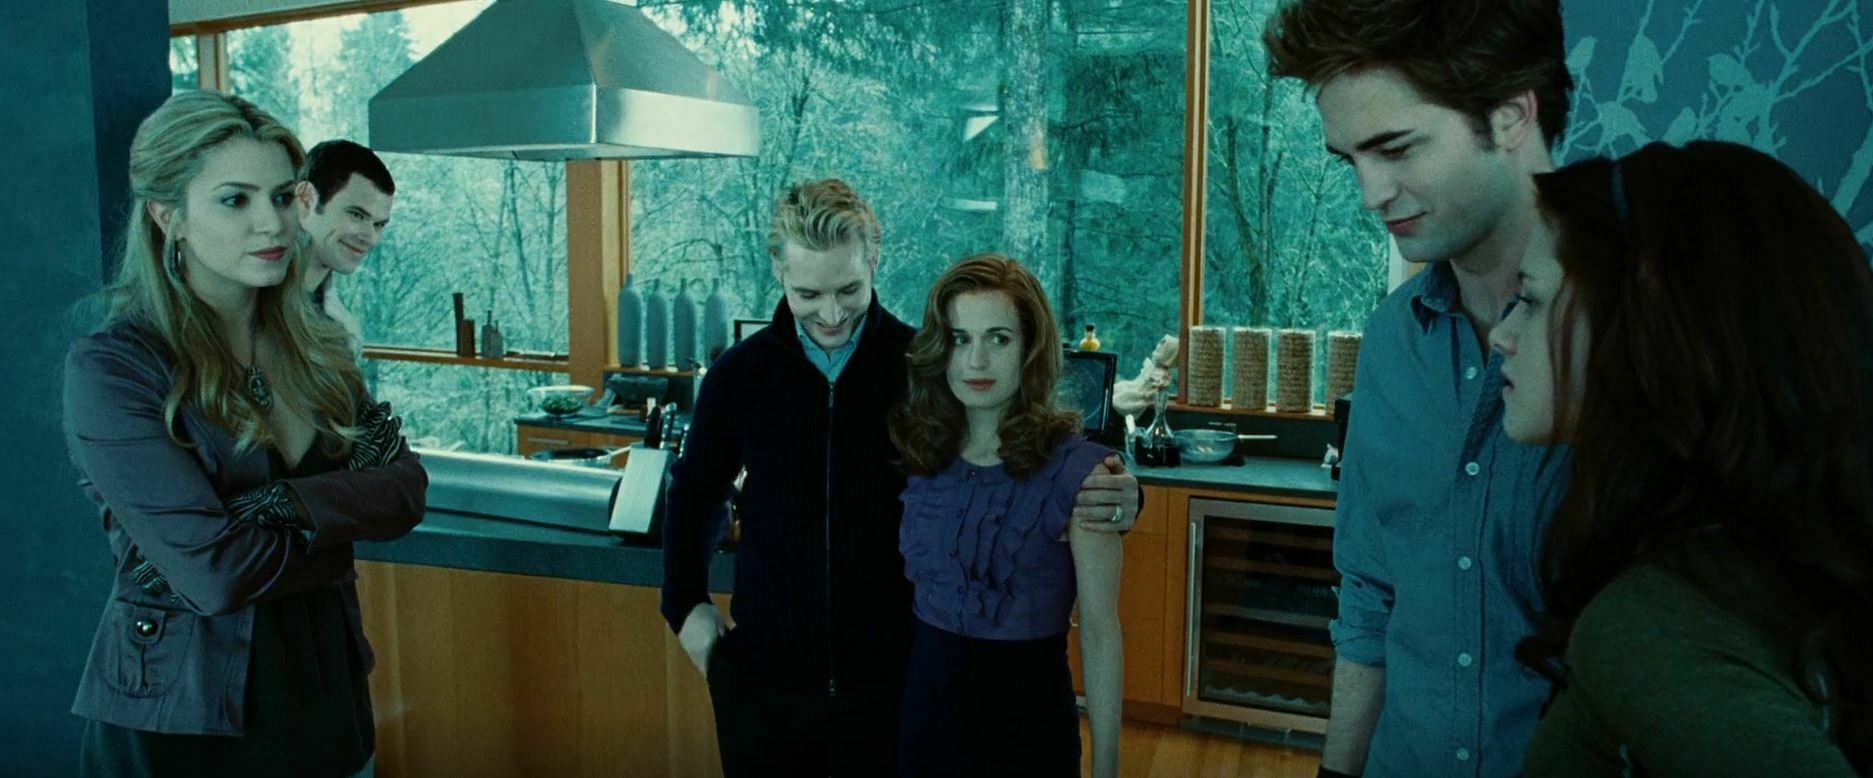 meet the cullens a comprehensive guide to twilight's vampire coven